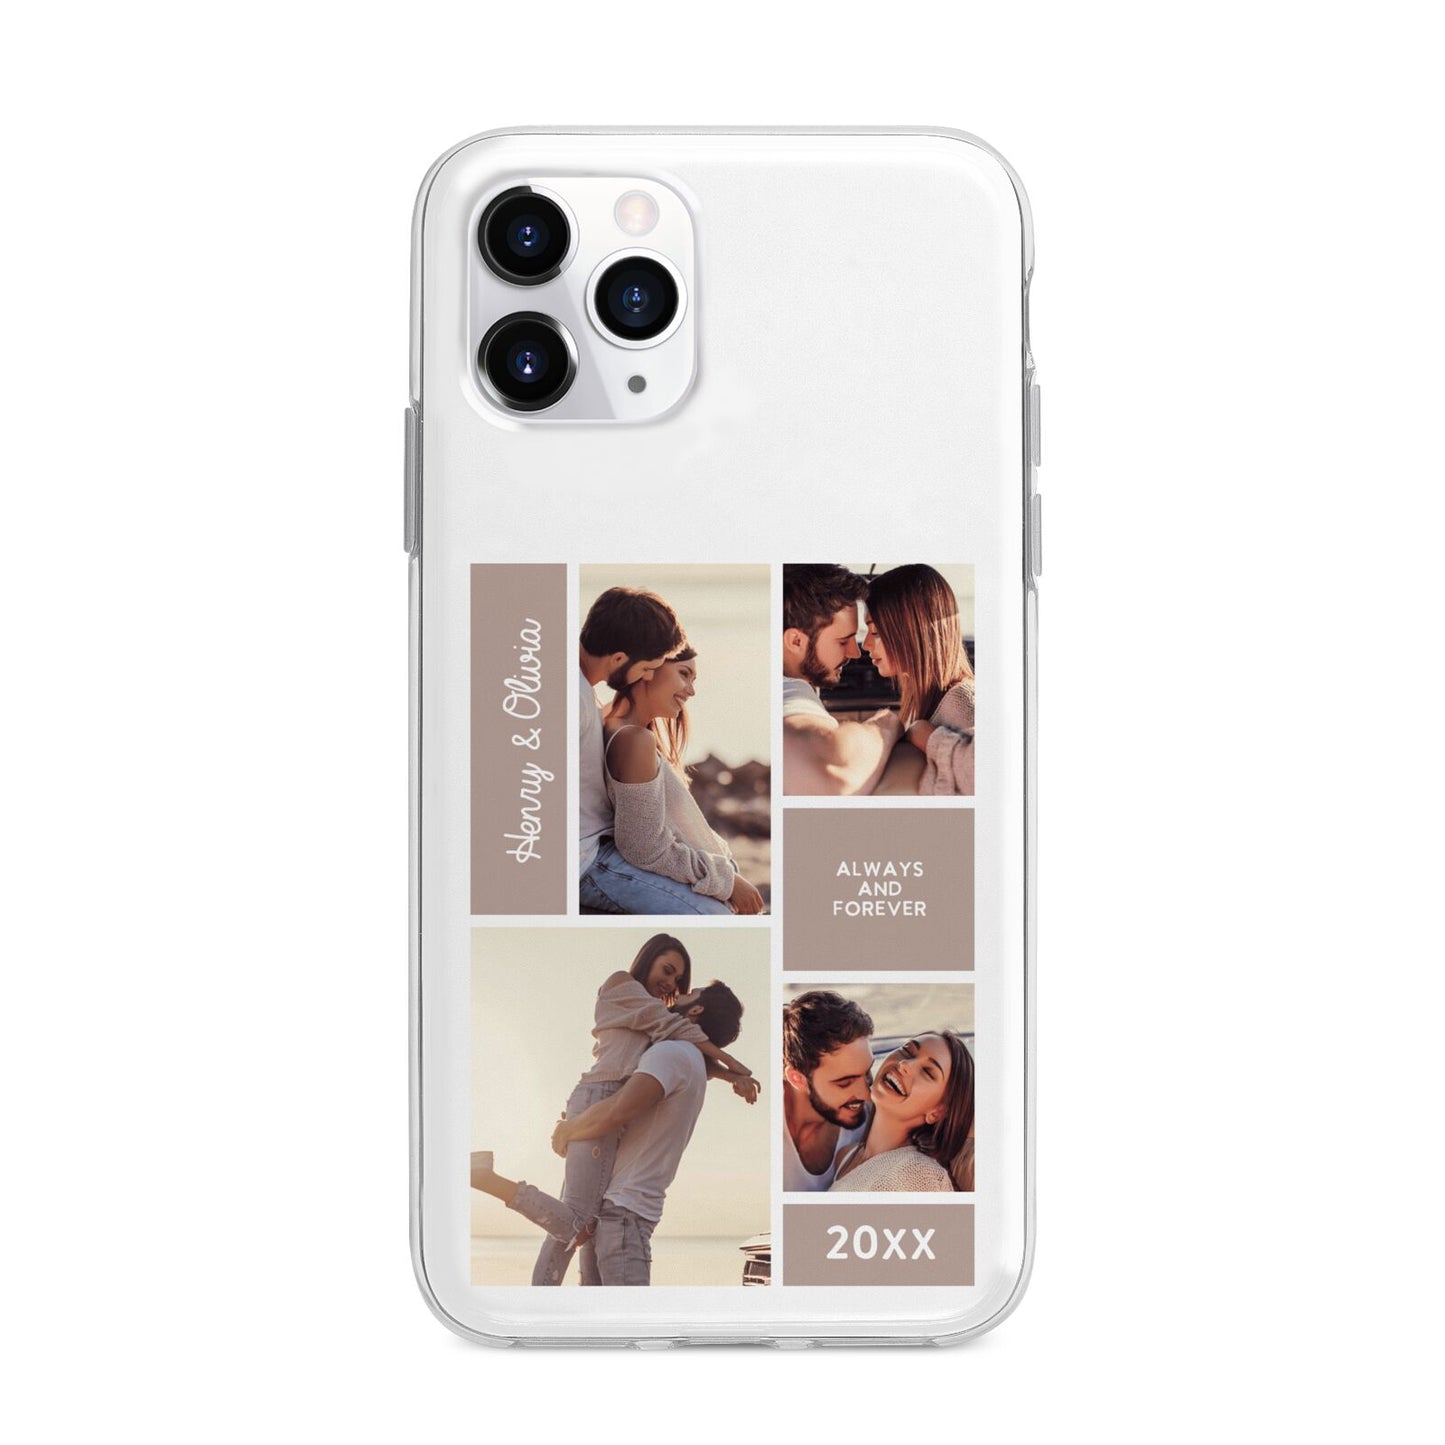 Couples Valentine Photo Collage Personalised Apple iPhone 11 Pro Max in Silver with Bumper Case